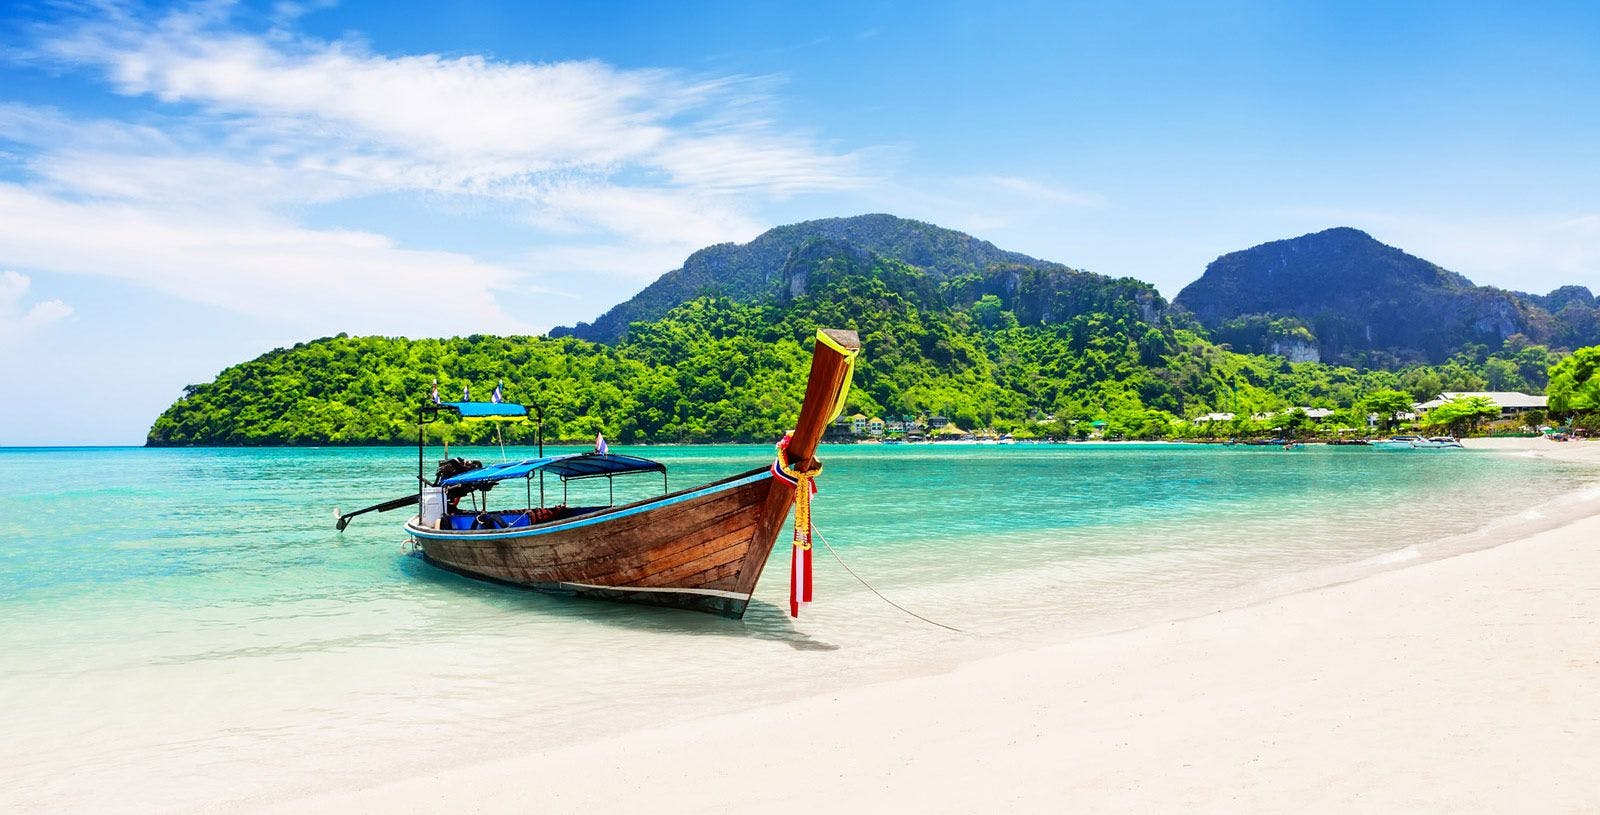 Traditional long-tail fishing boat on the beach in Thailand